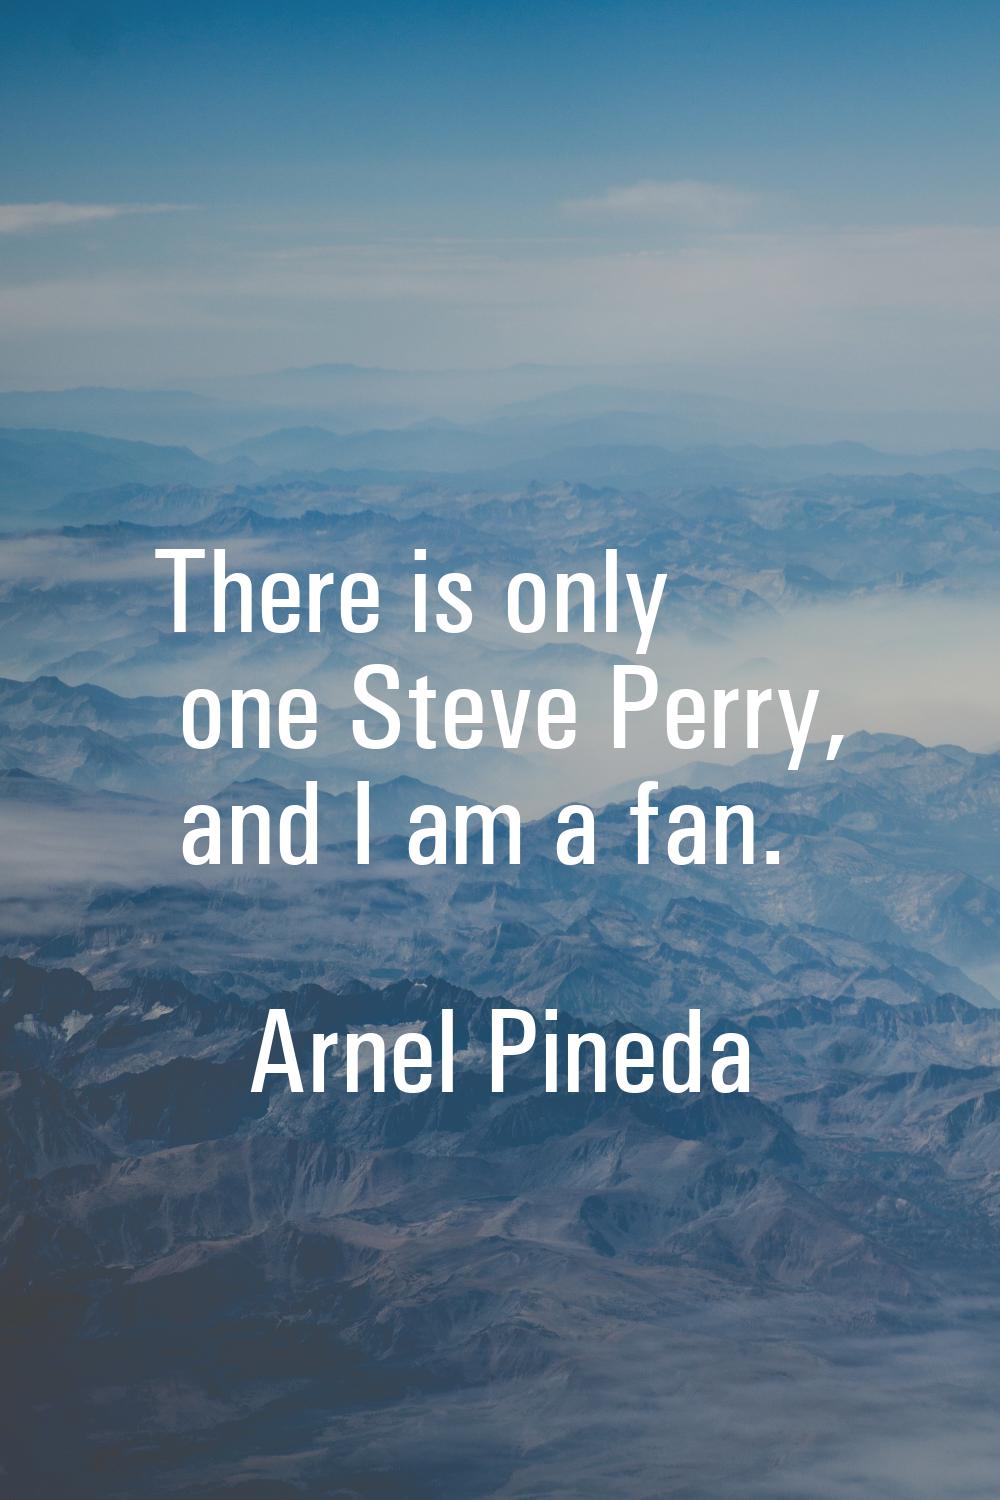 There is only one Steve Perry, and I am a fan.